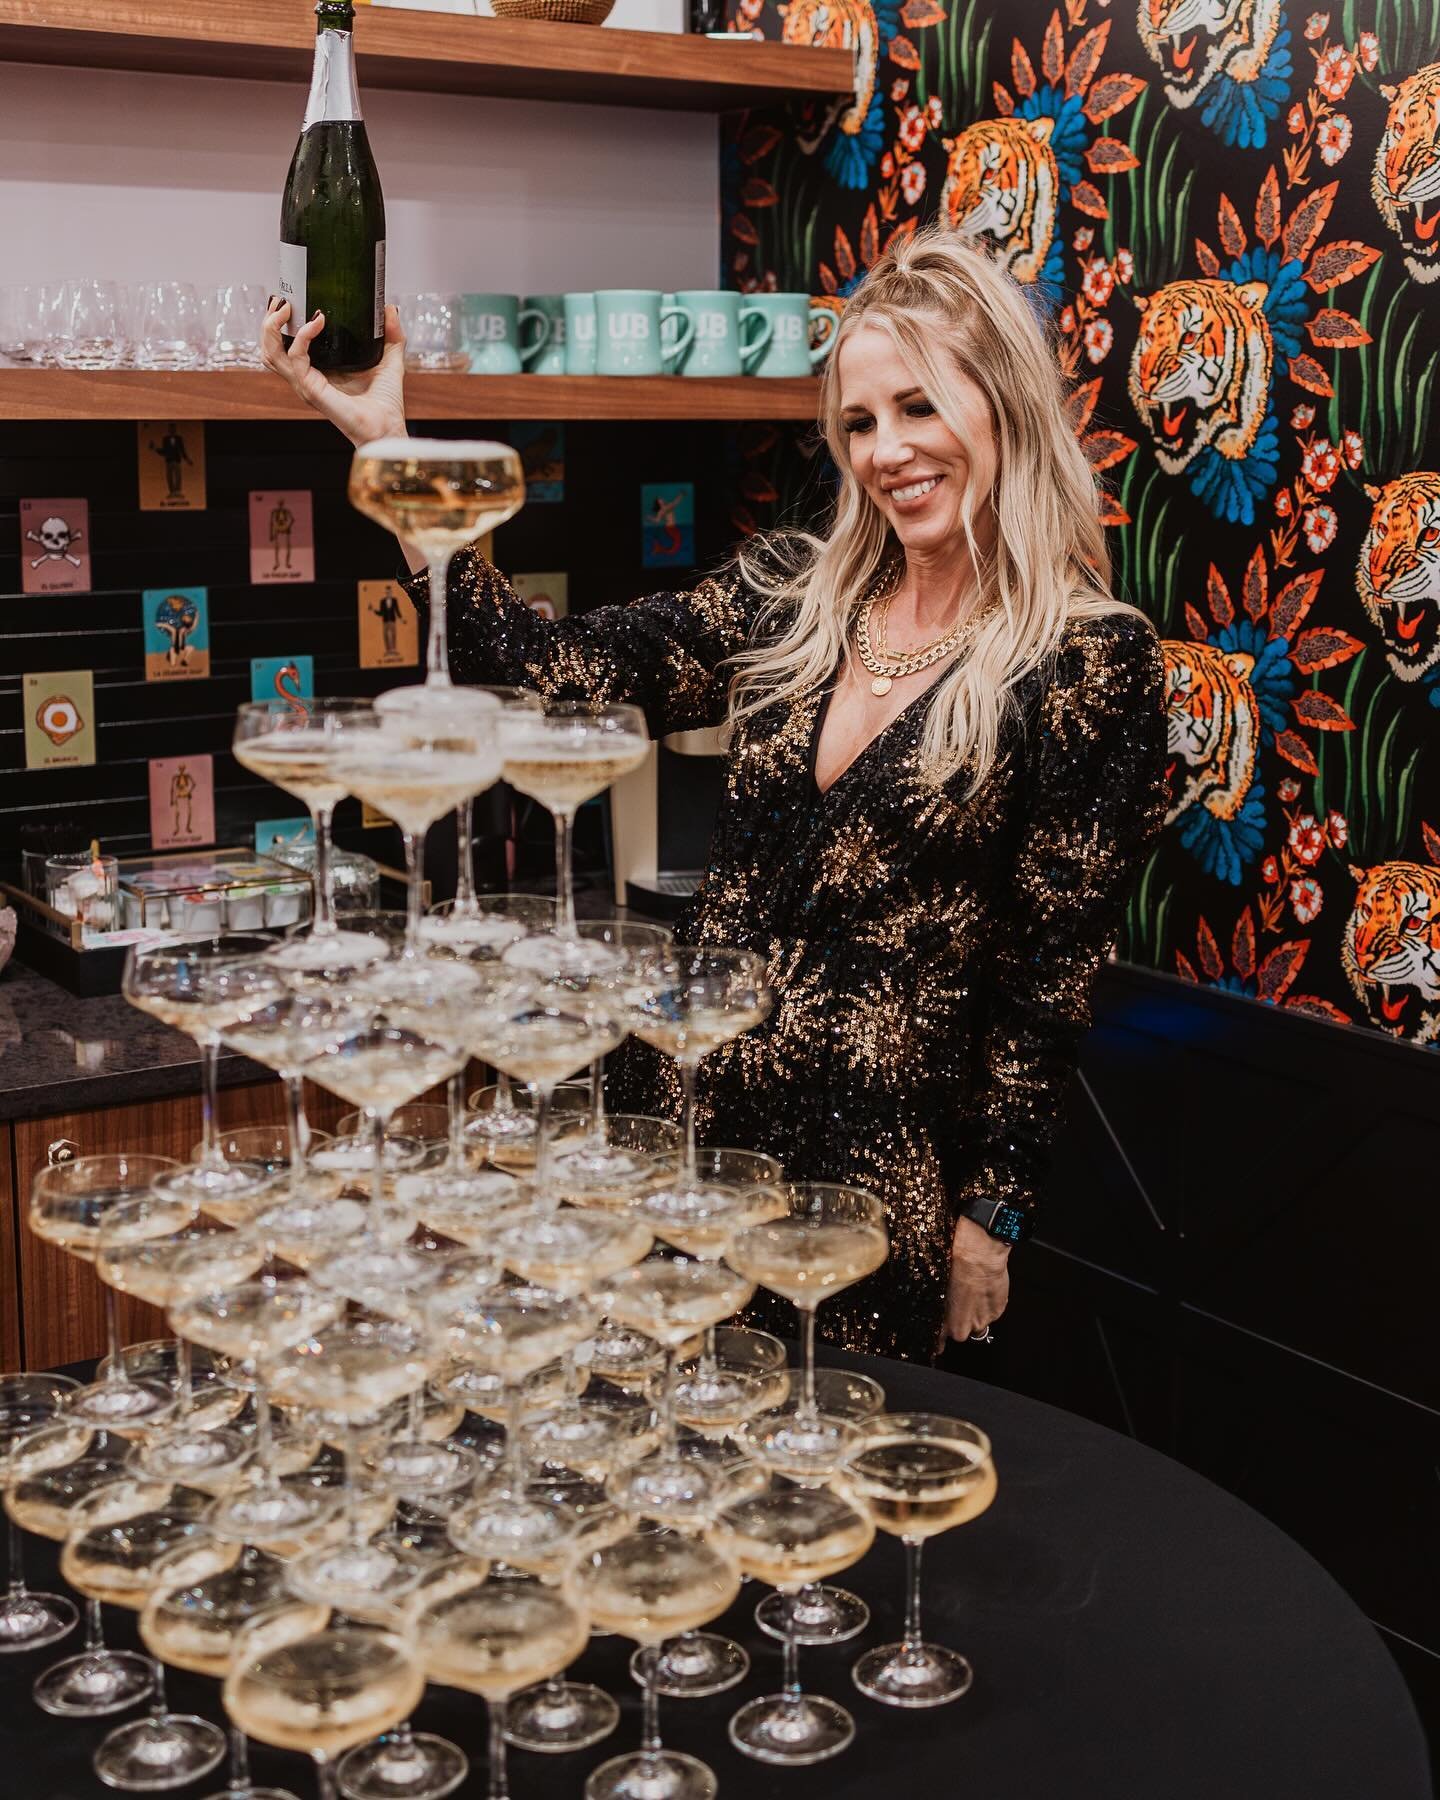 Always a pleasure to work with @urbanbettysalon, this time we helped them with the opening of their 3rd location in Round Rock!  Congratulations Chelle!! Truly an amazing entrepreneur!! #atxeventplanner #austineventplanner #atxsalon #atxsalons #round